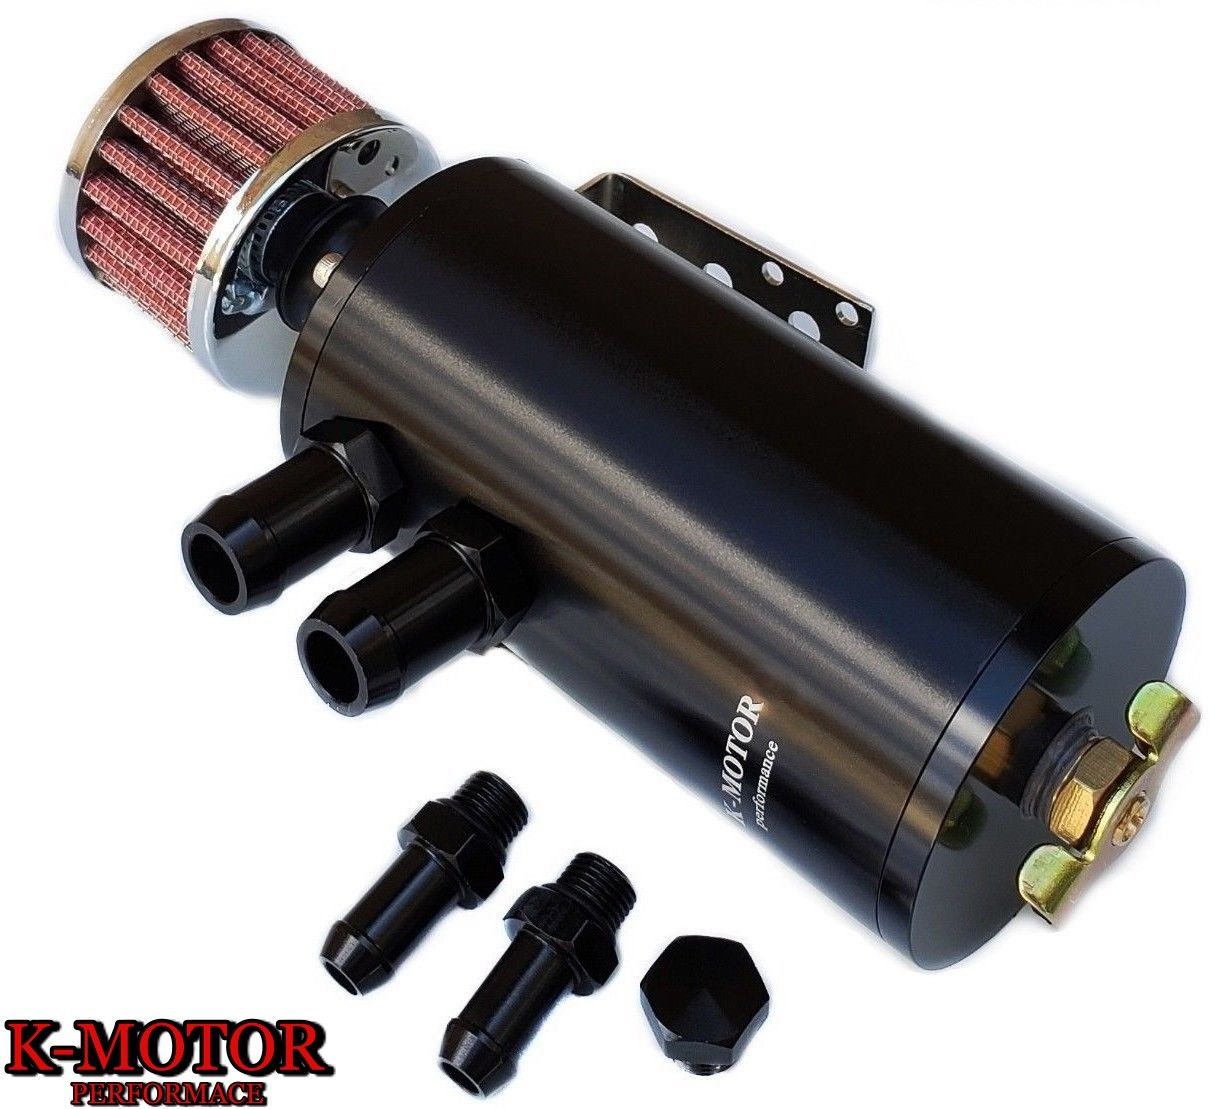 K-Motor Performance Engine Aluminum Baffled Oil Catch Can Tank With Oil Separator Filter Installed Inside 